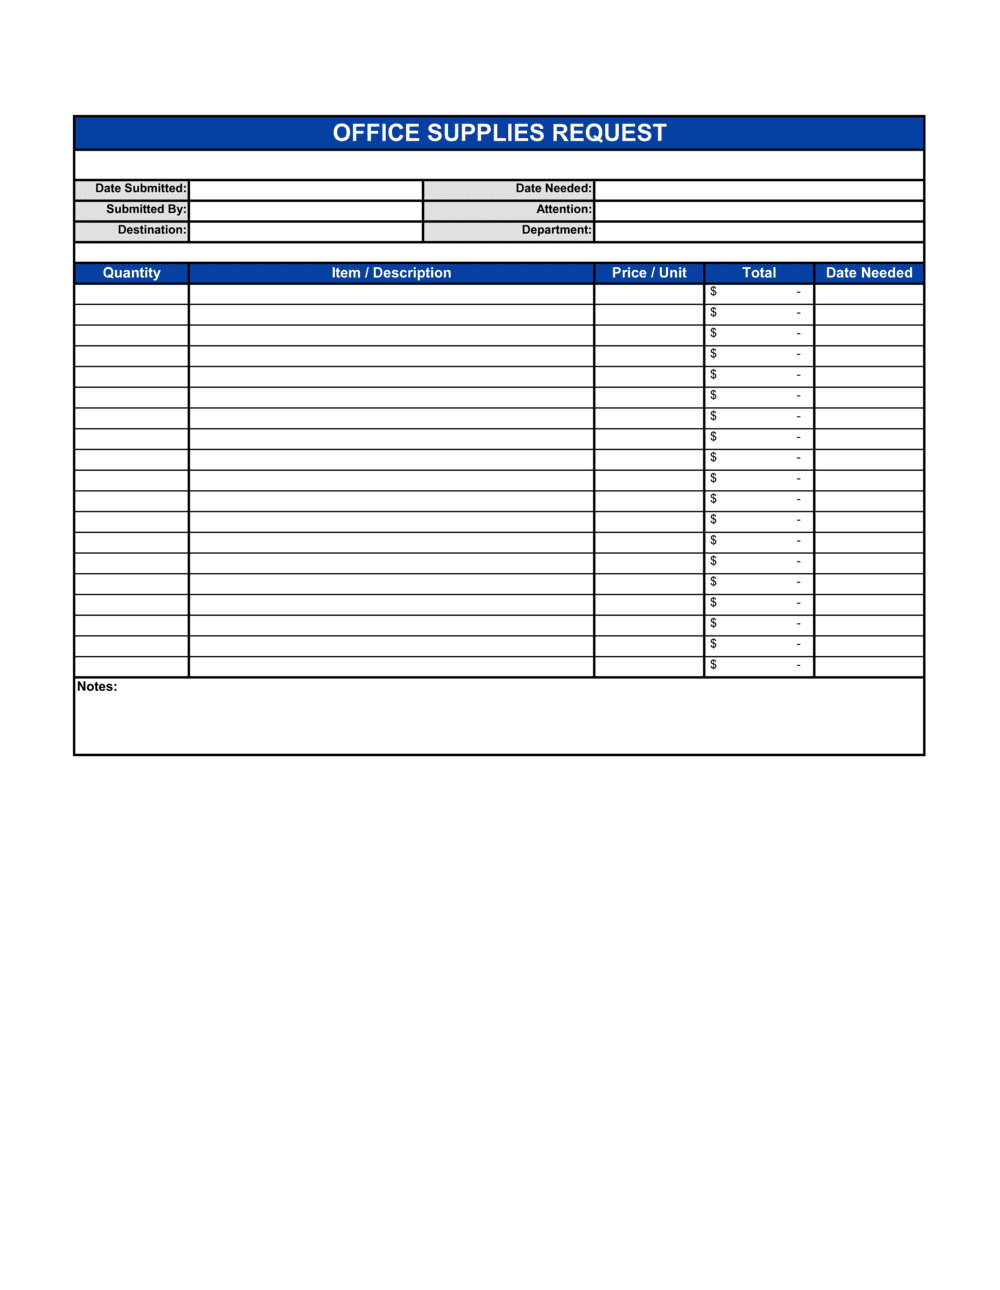 Office Supply Request Form Template